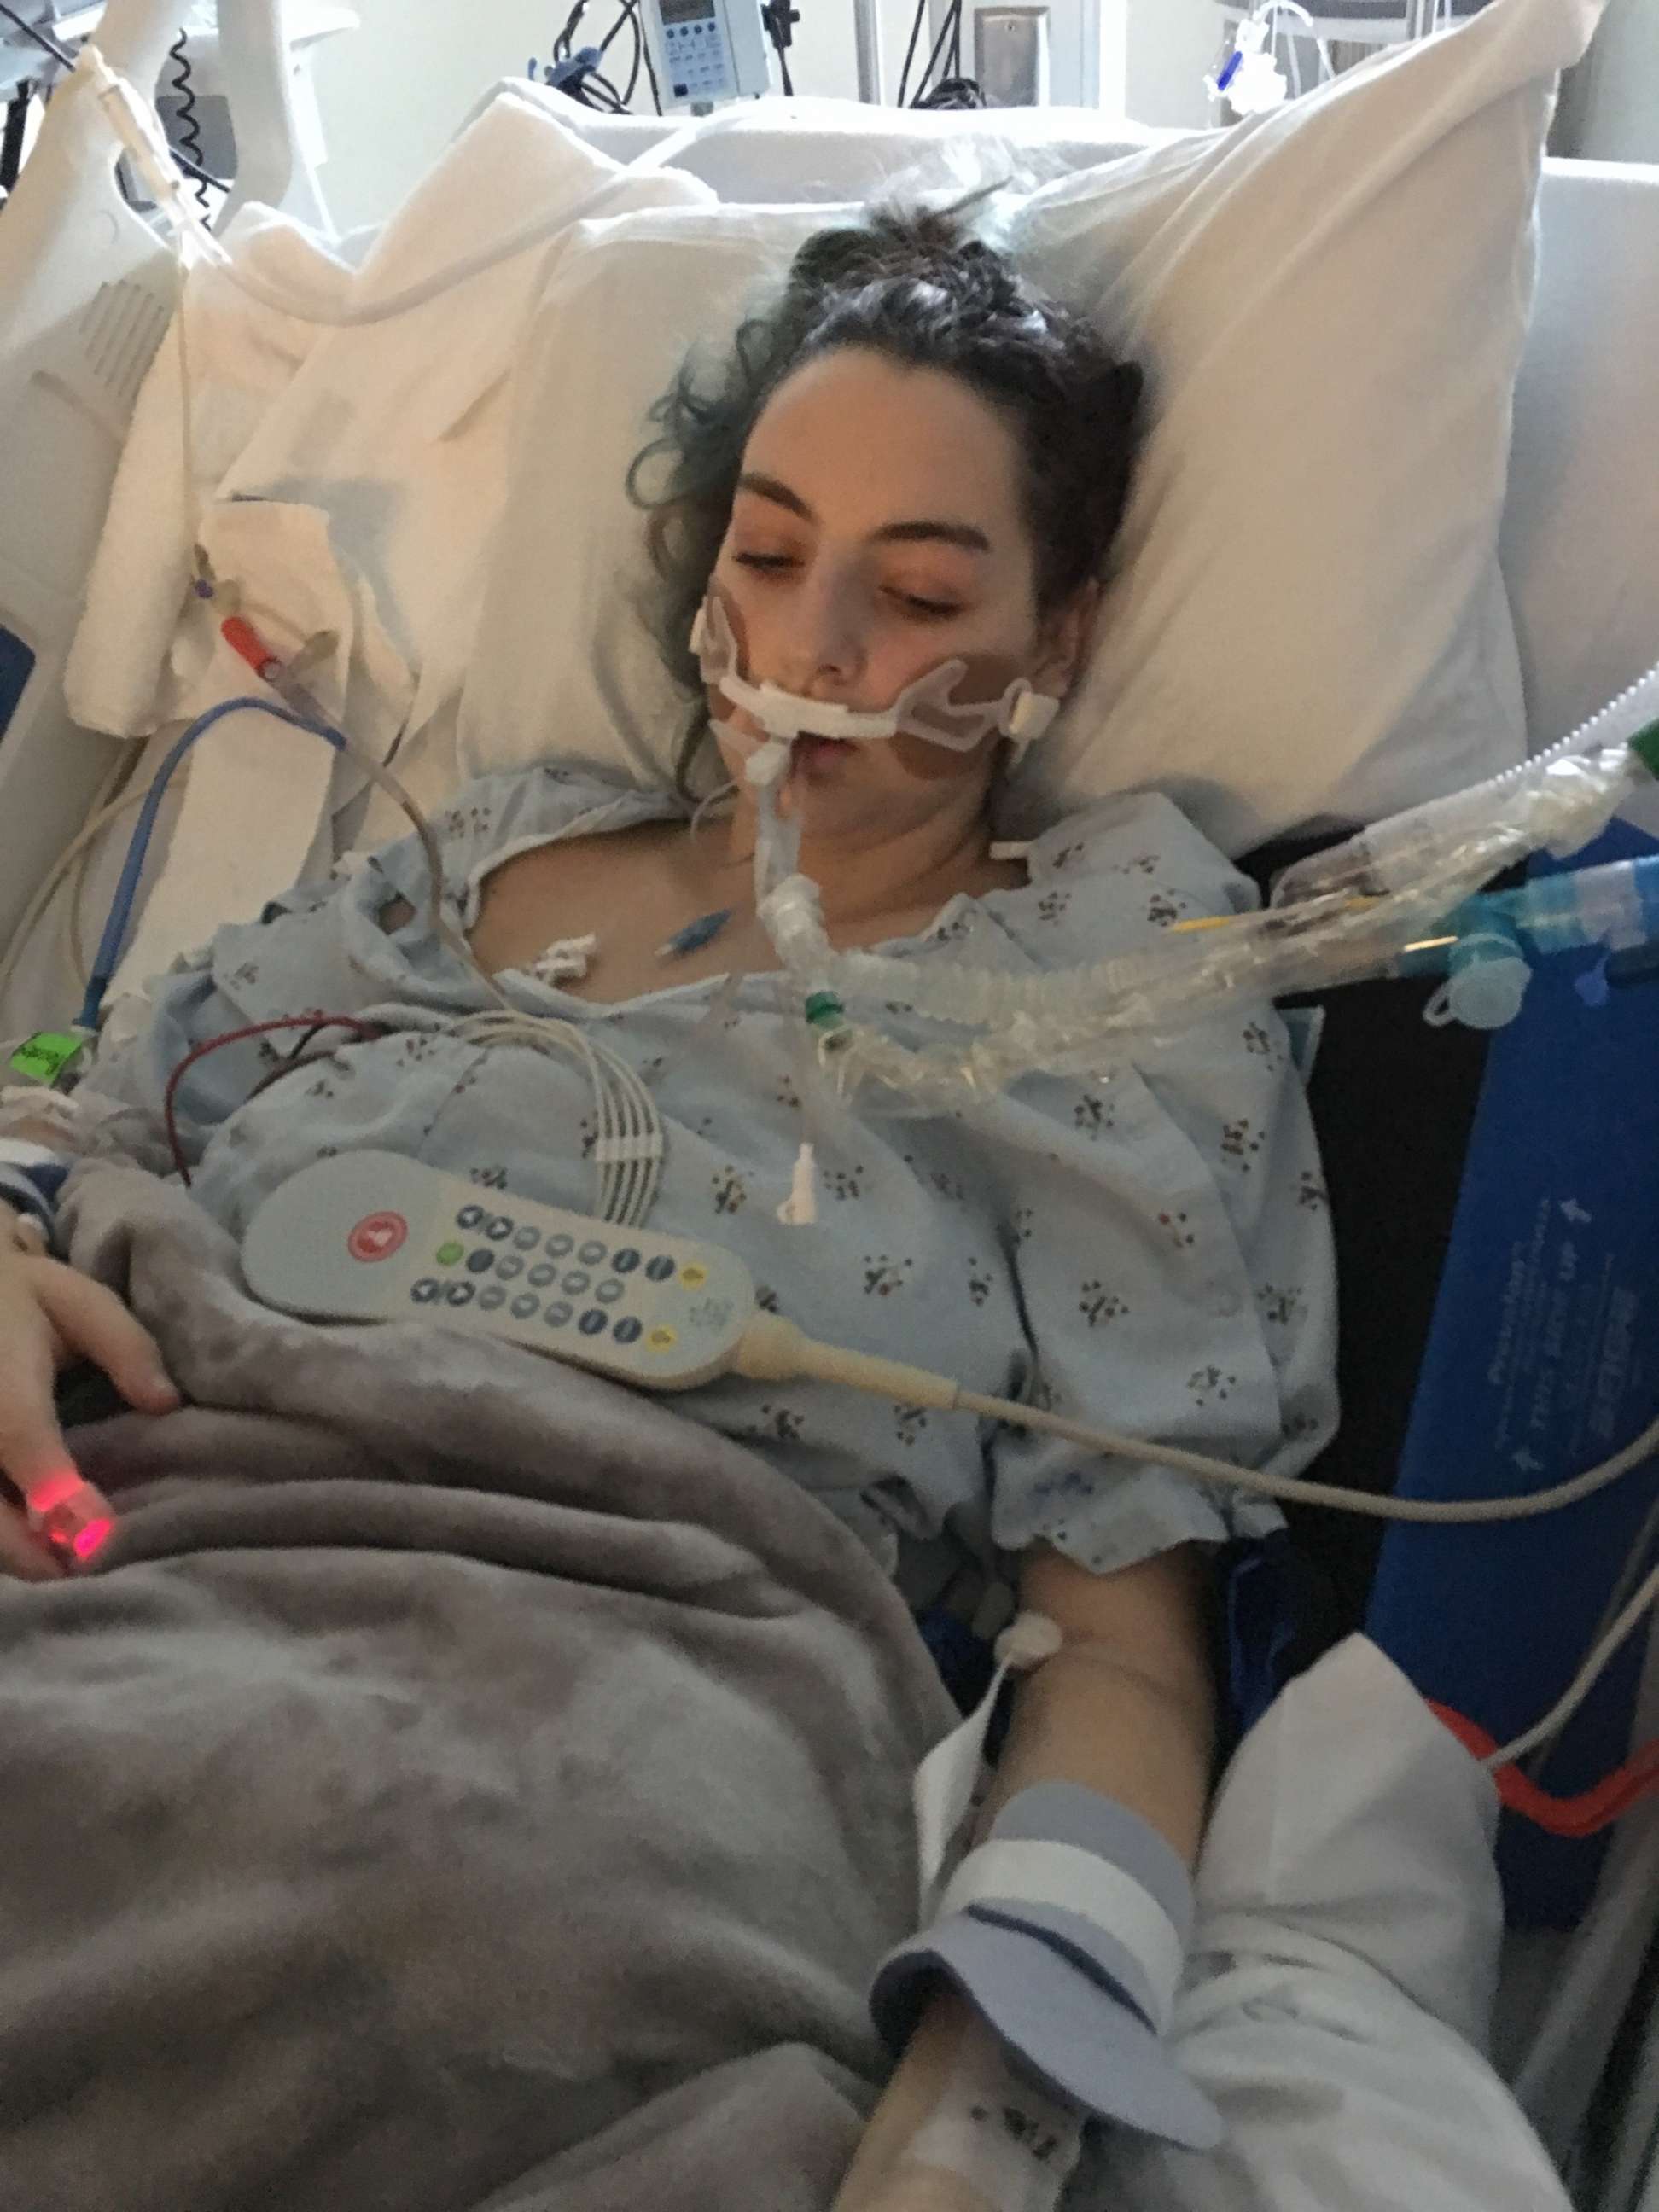 PHOTO: Simah Herman, 18, was rushed to the hospital in August after waking up unable to breathe. 